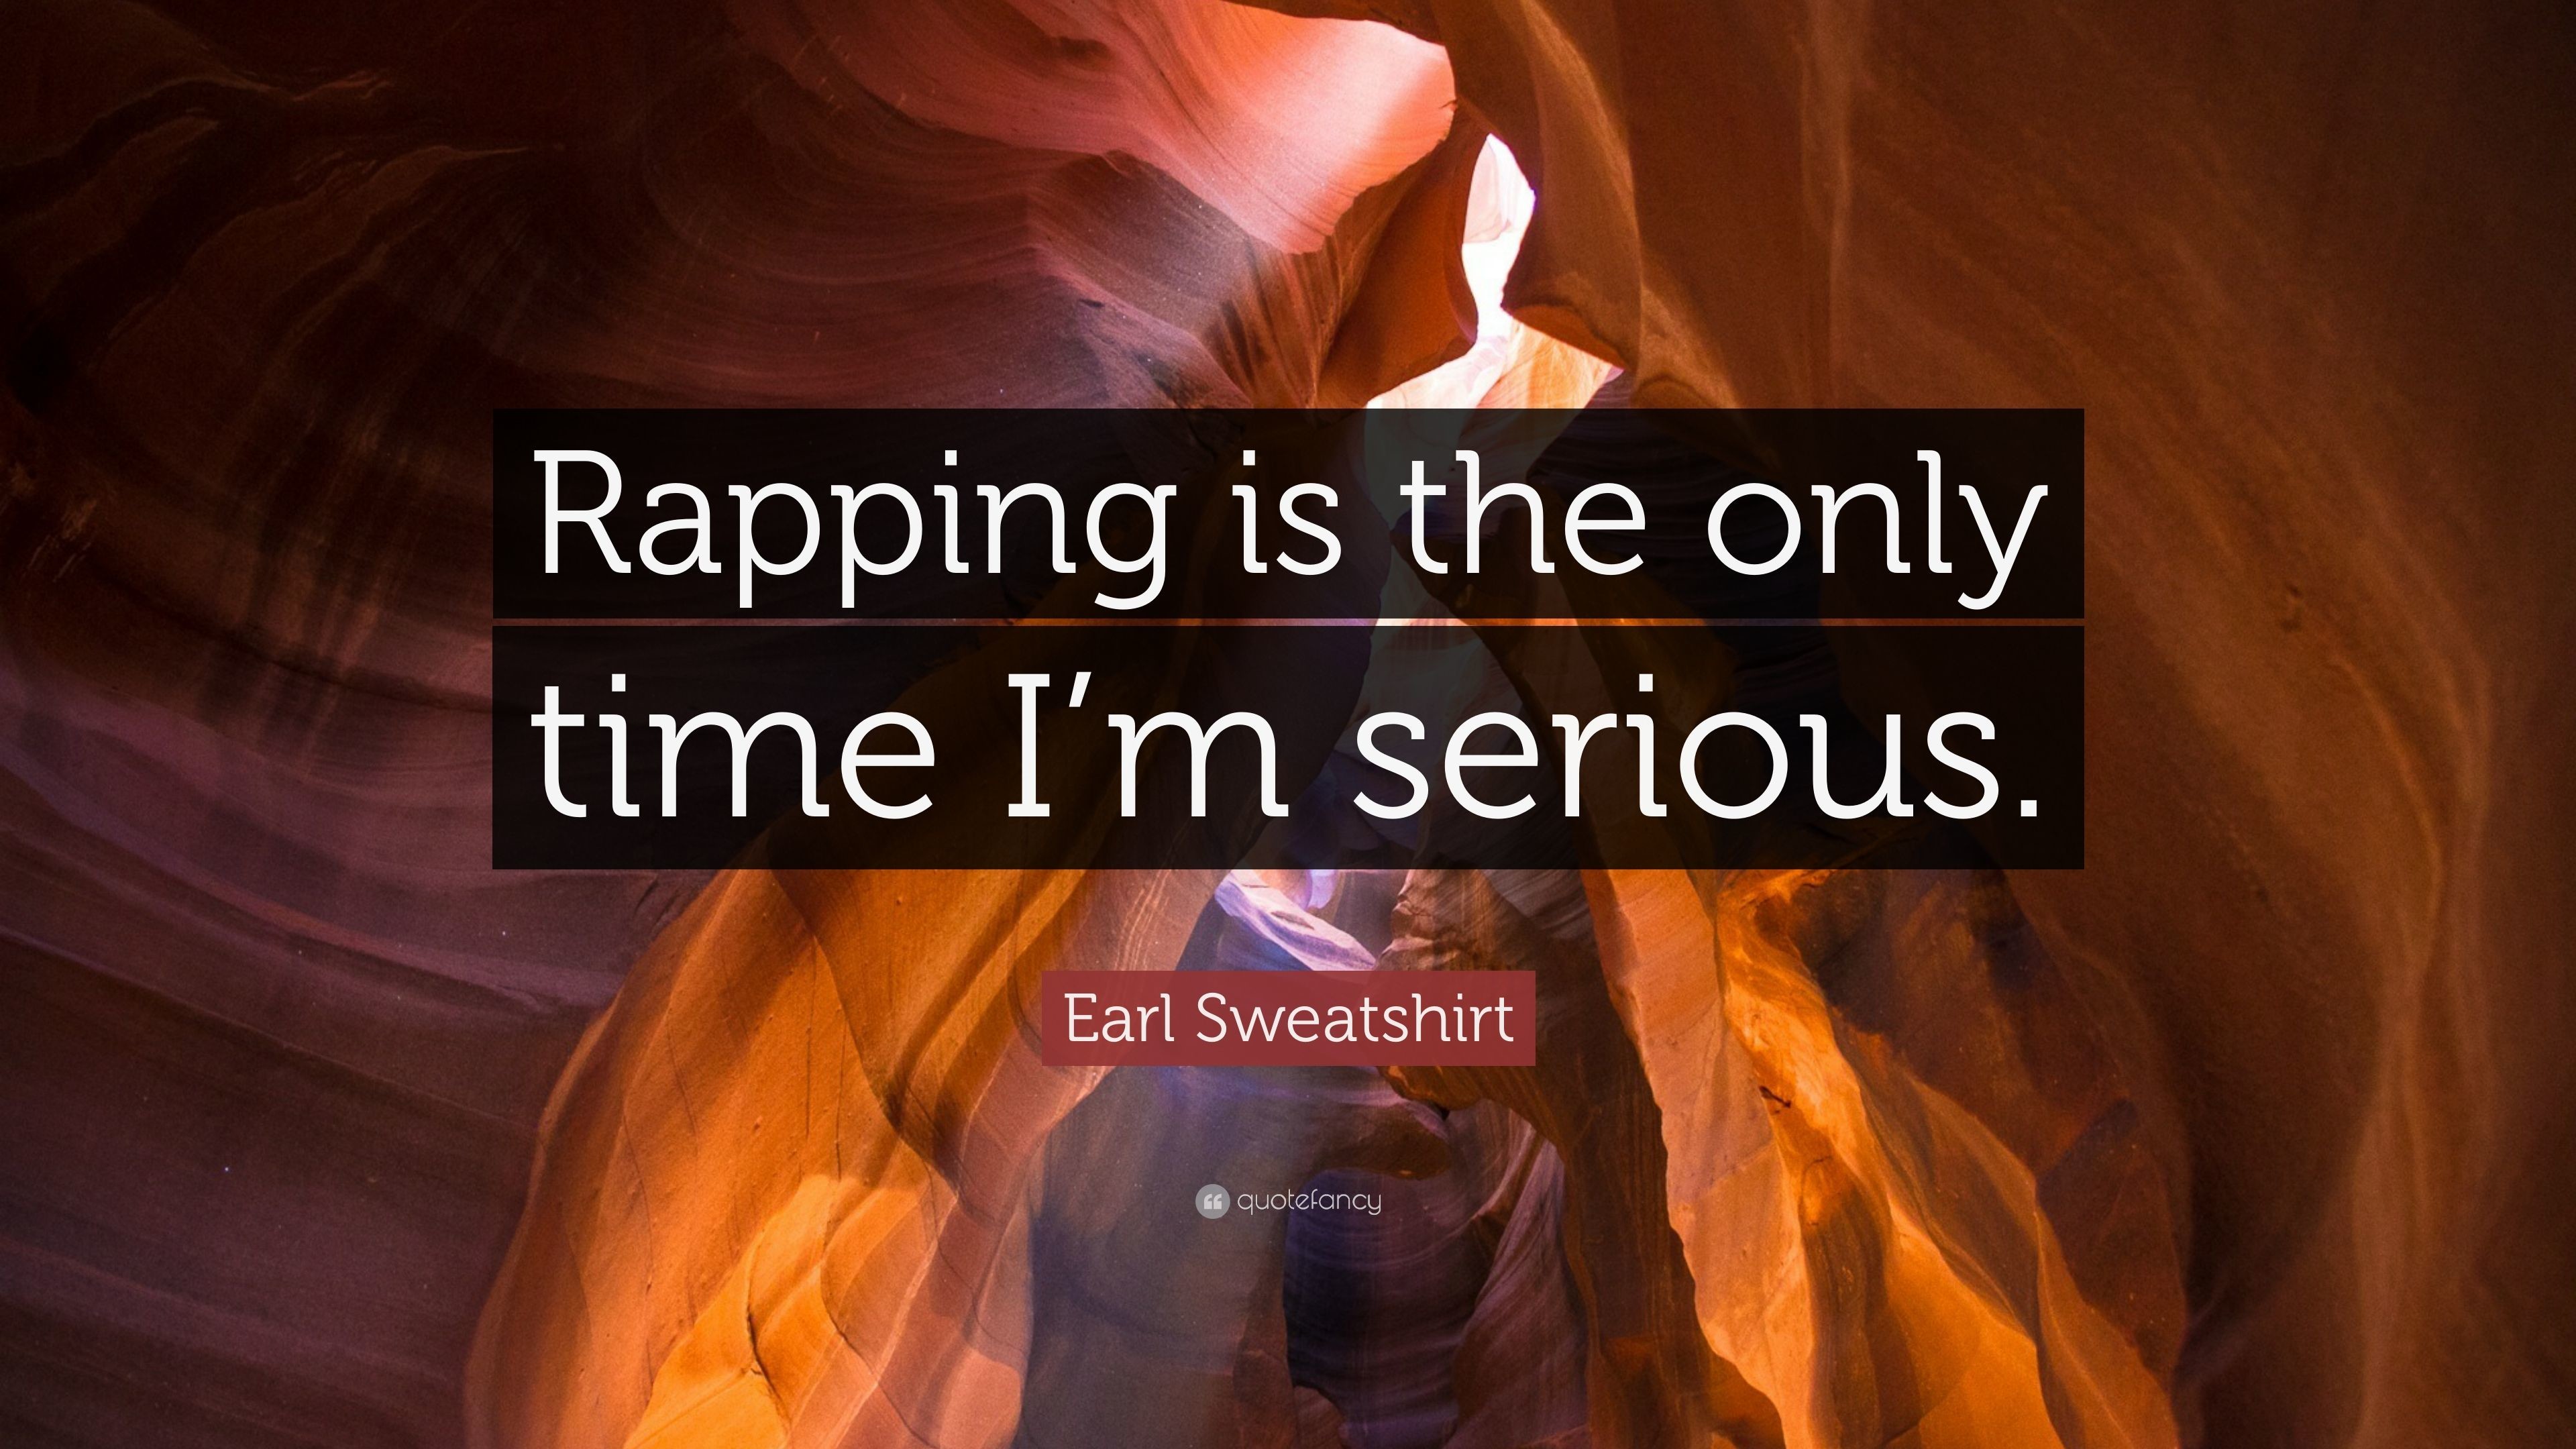 Earl Sweatshirt Quote Rapping is the only time Im serious.